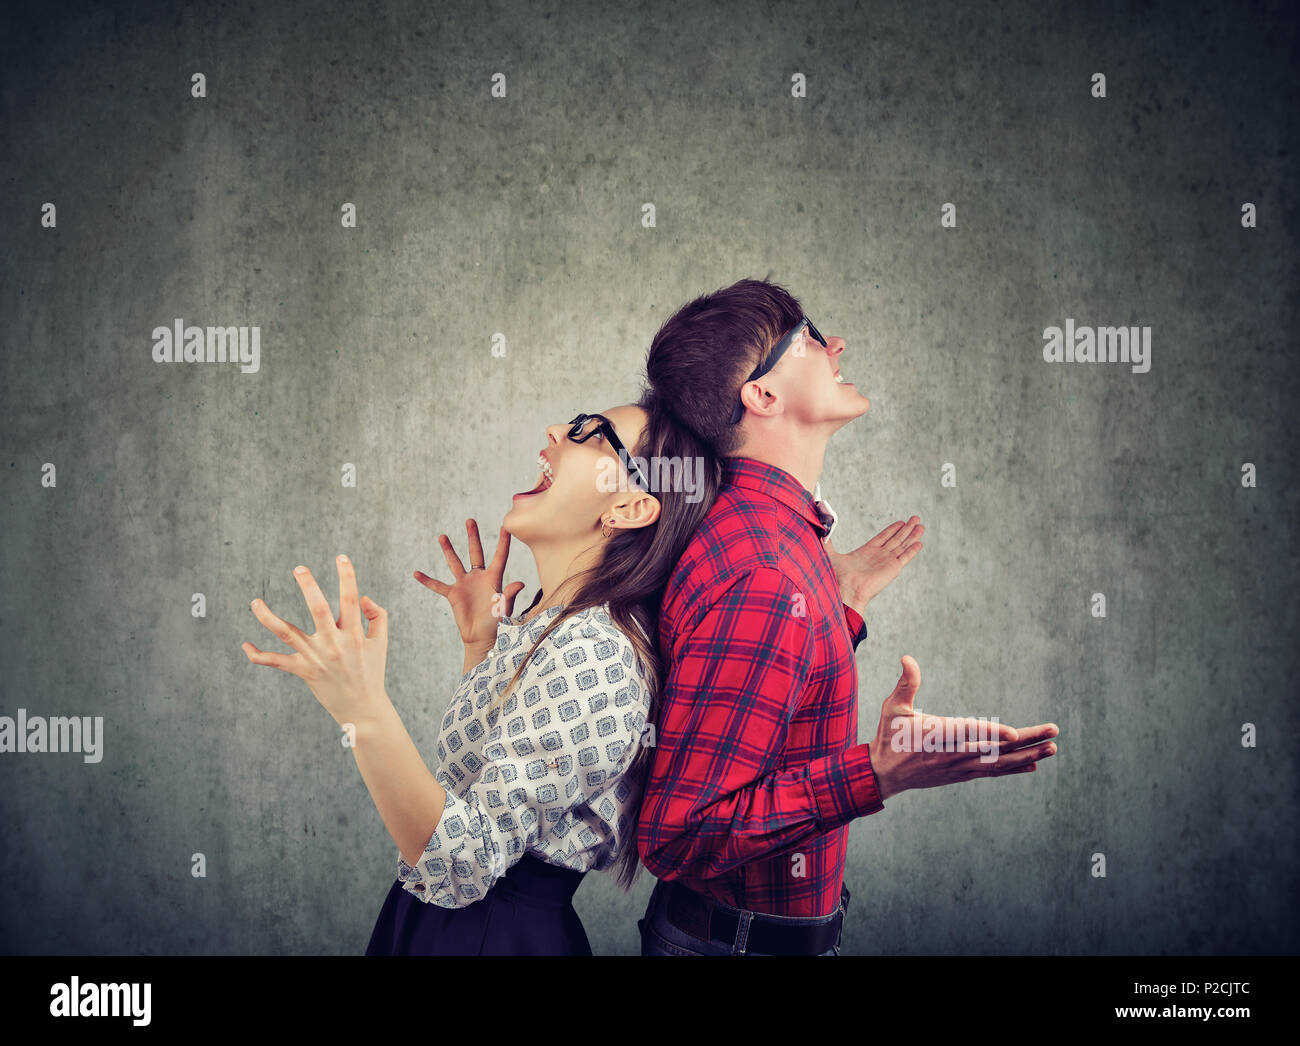 Side view of man and woman in glasses standing back to back screaming in frustration Stock Photo